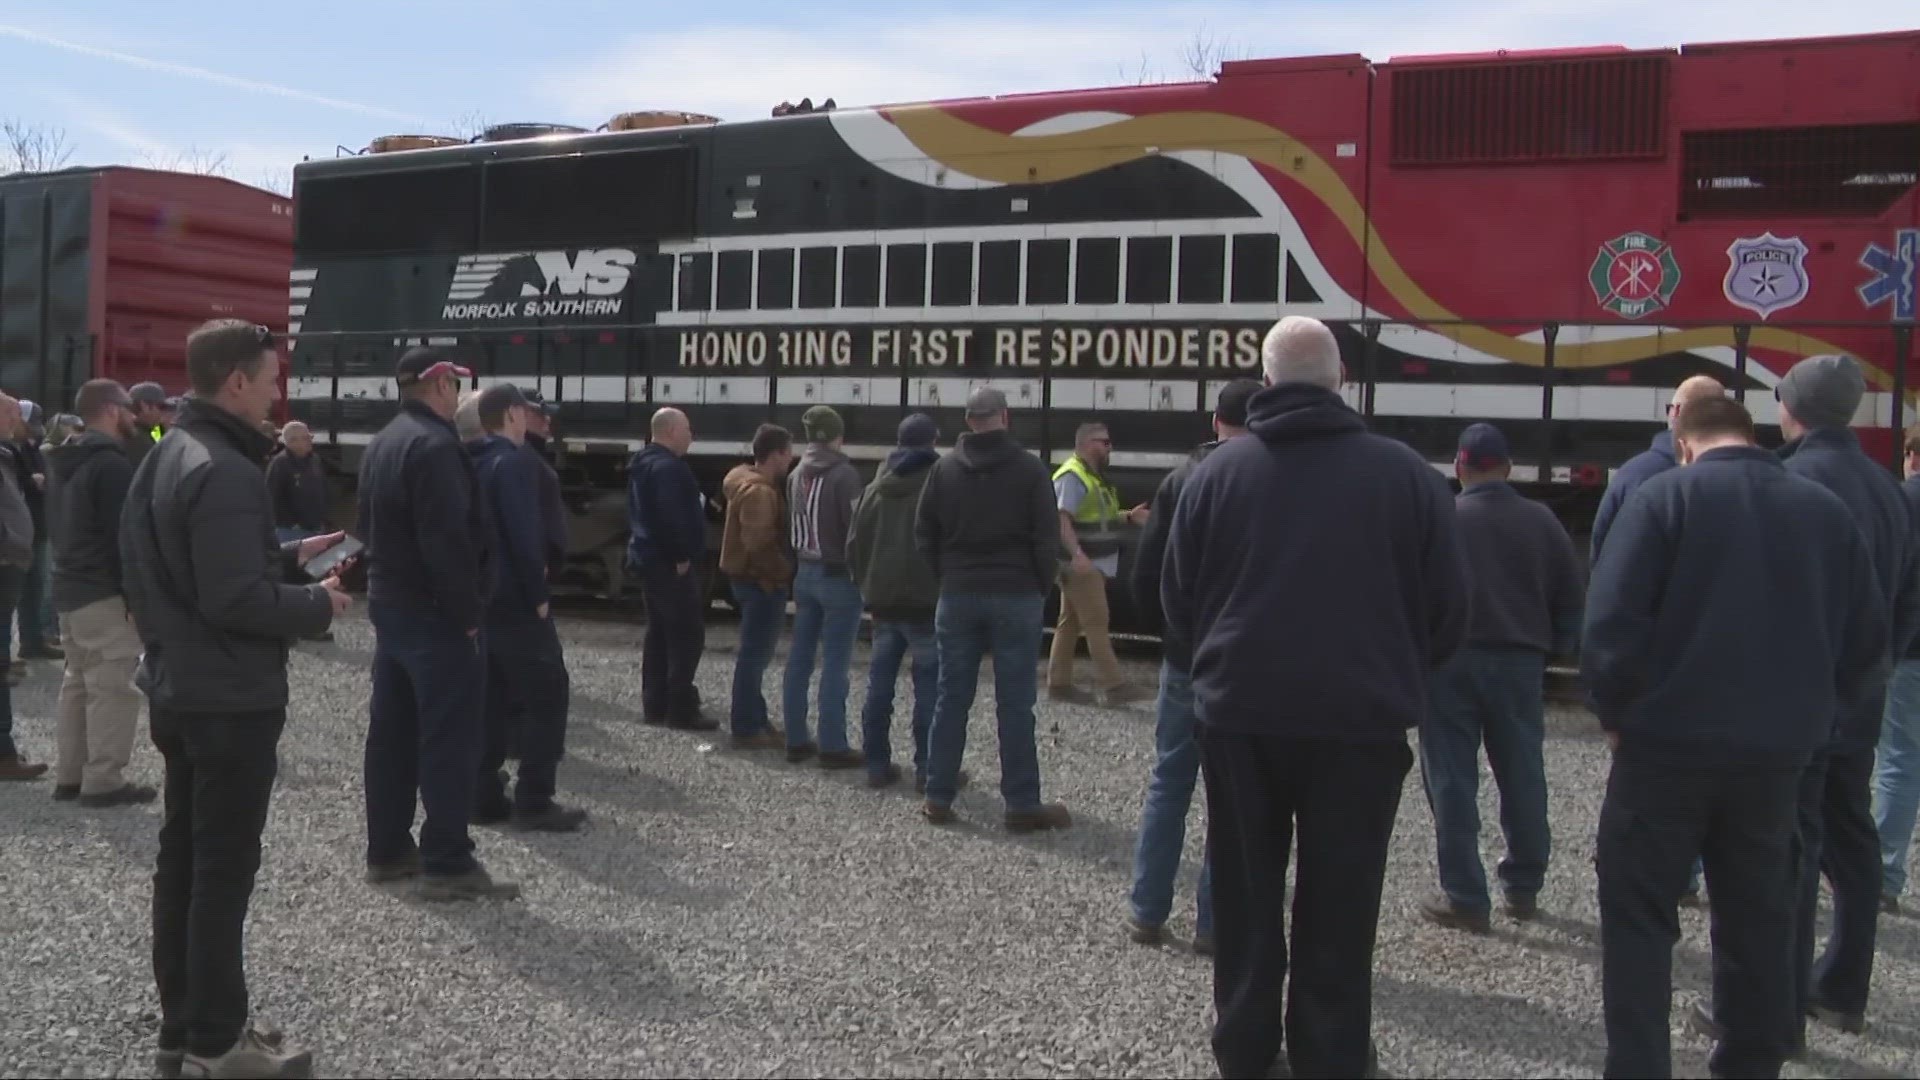 The training program will educate more than 350 first responders over the next two weeks.